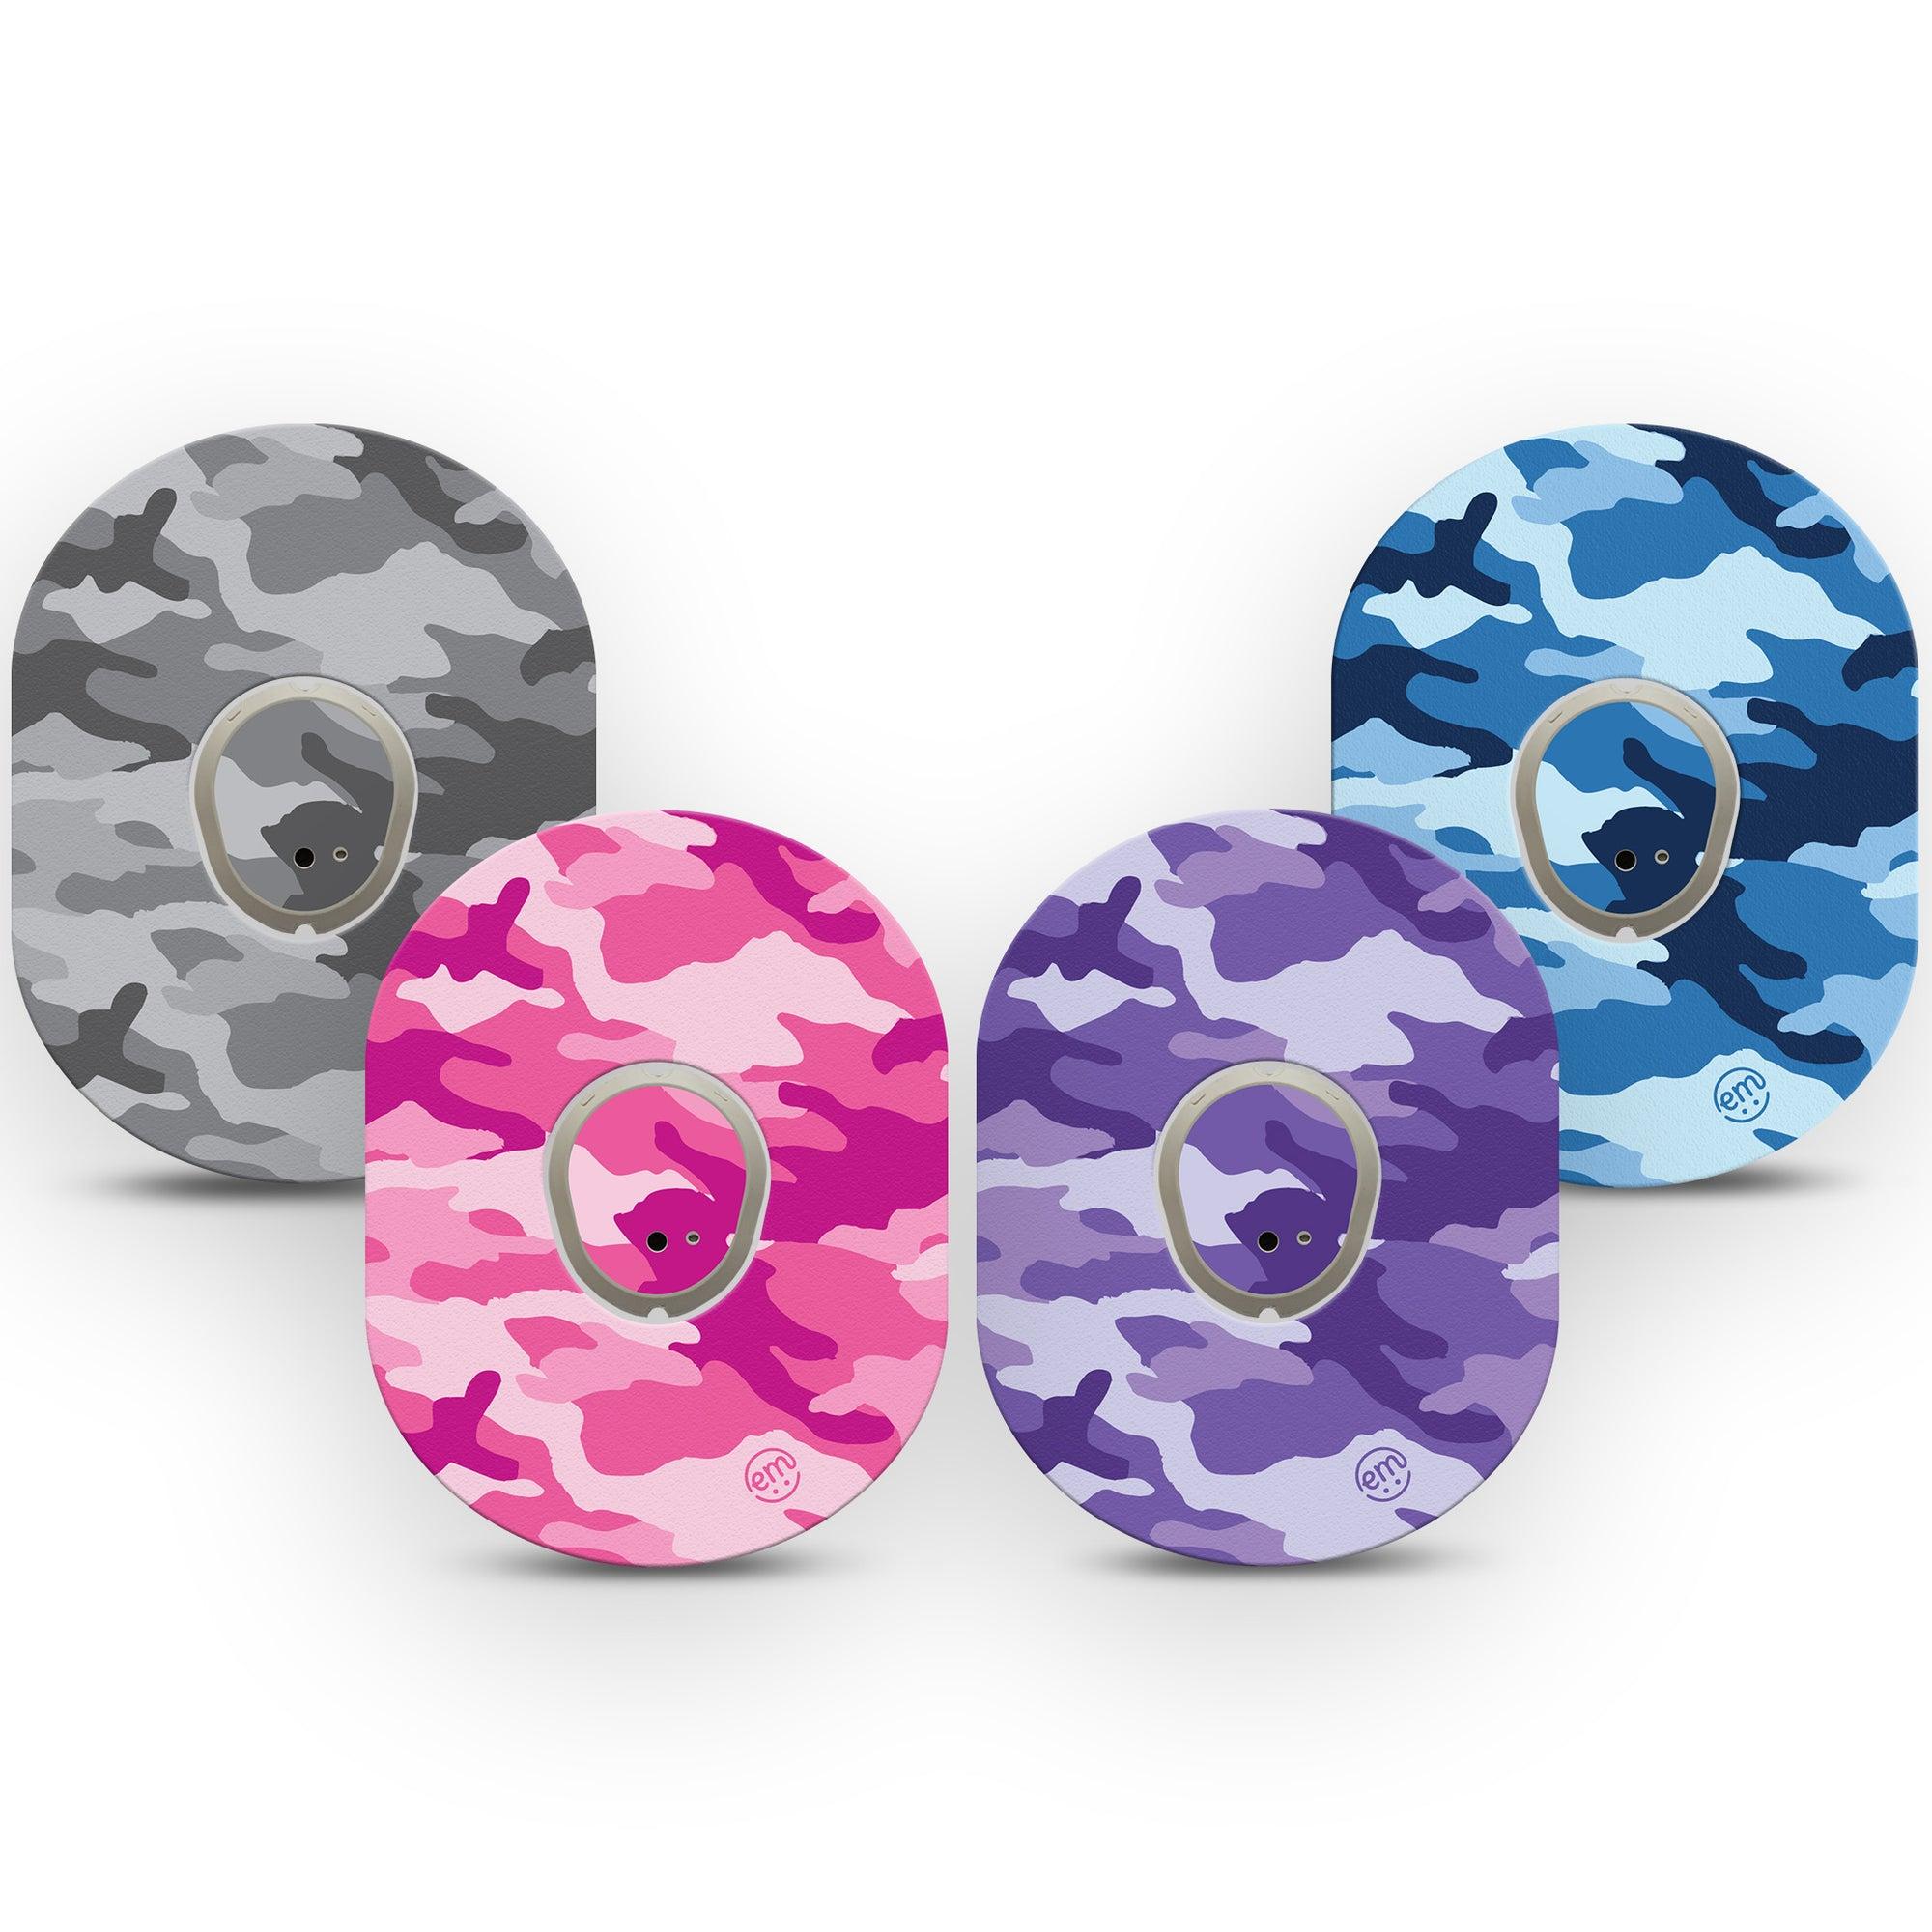 ExpressionMedCool Camo Variety Pack Dexcom G7 Tape and Sticker, 8-Pack Variety, Colorful Camo, CGM Overlay Tape Design 